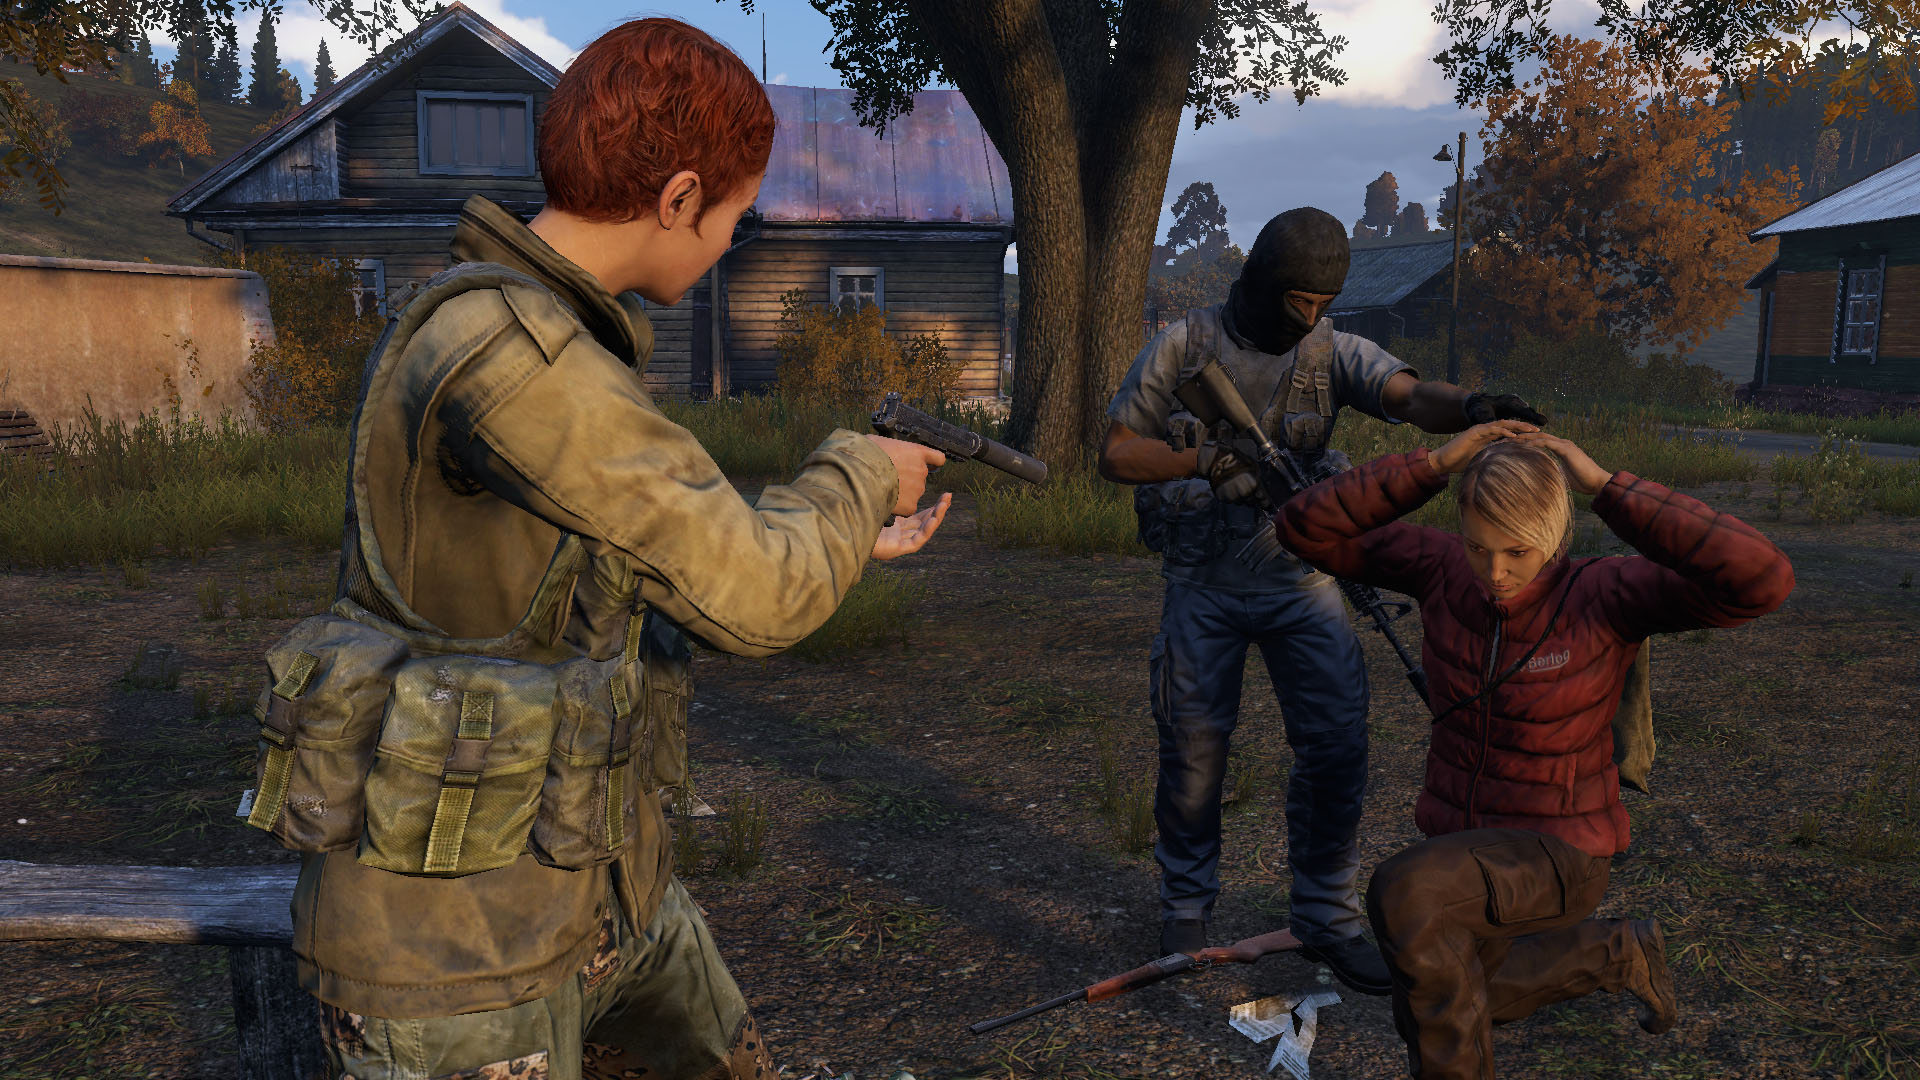 Action, adventure, Bohemia Interactive, Dayz, Dayz Review, Massively Multiplayer, multiplayer, open world, PS4, PS4 Review, Rating 7/10, Role Playing Game, RPG, survival, Zombies